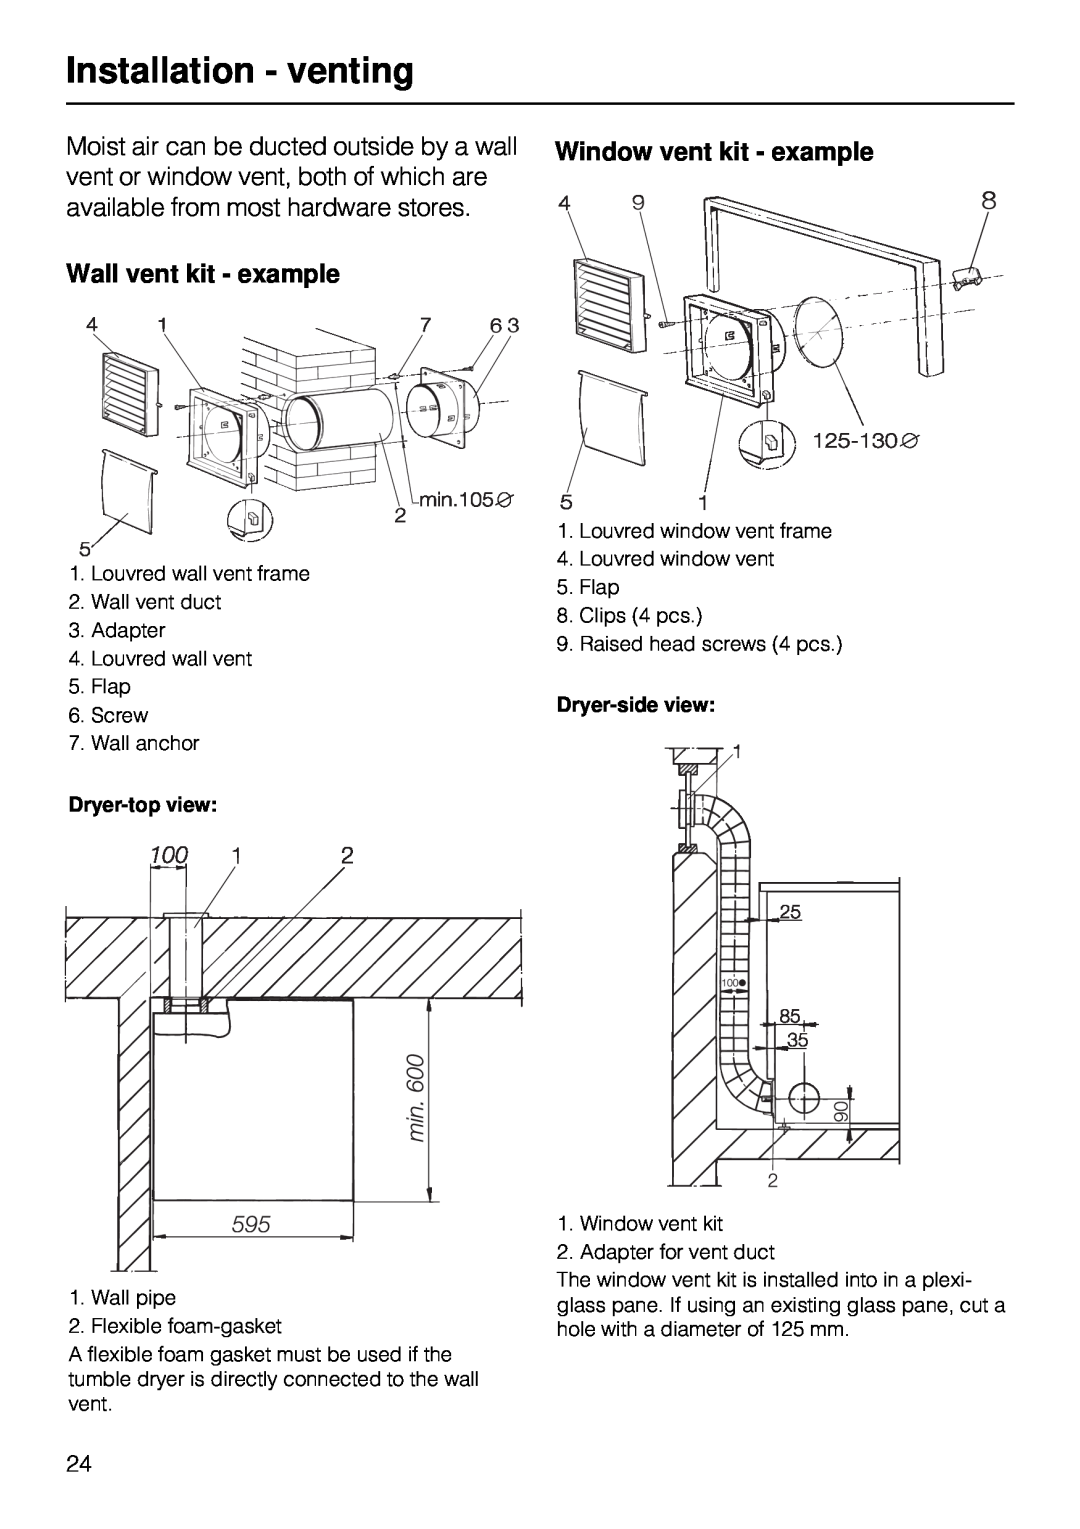 Miele T 1515 operating instructions Wall vent kit - example, Installation - venting, available from most hardware stores 